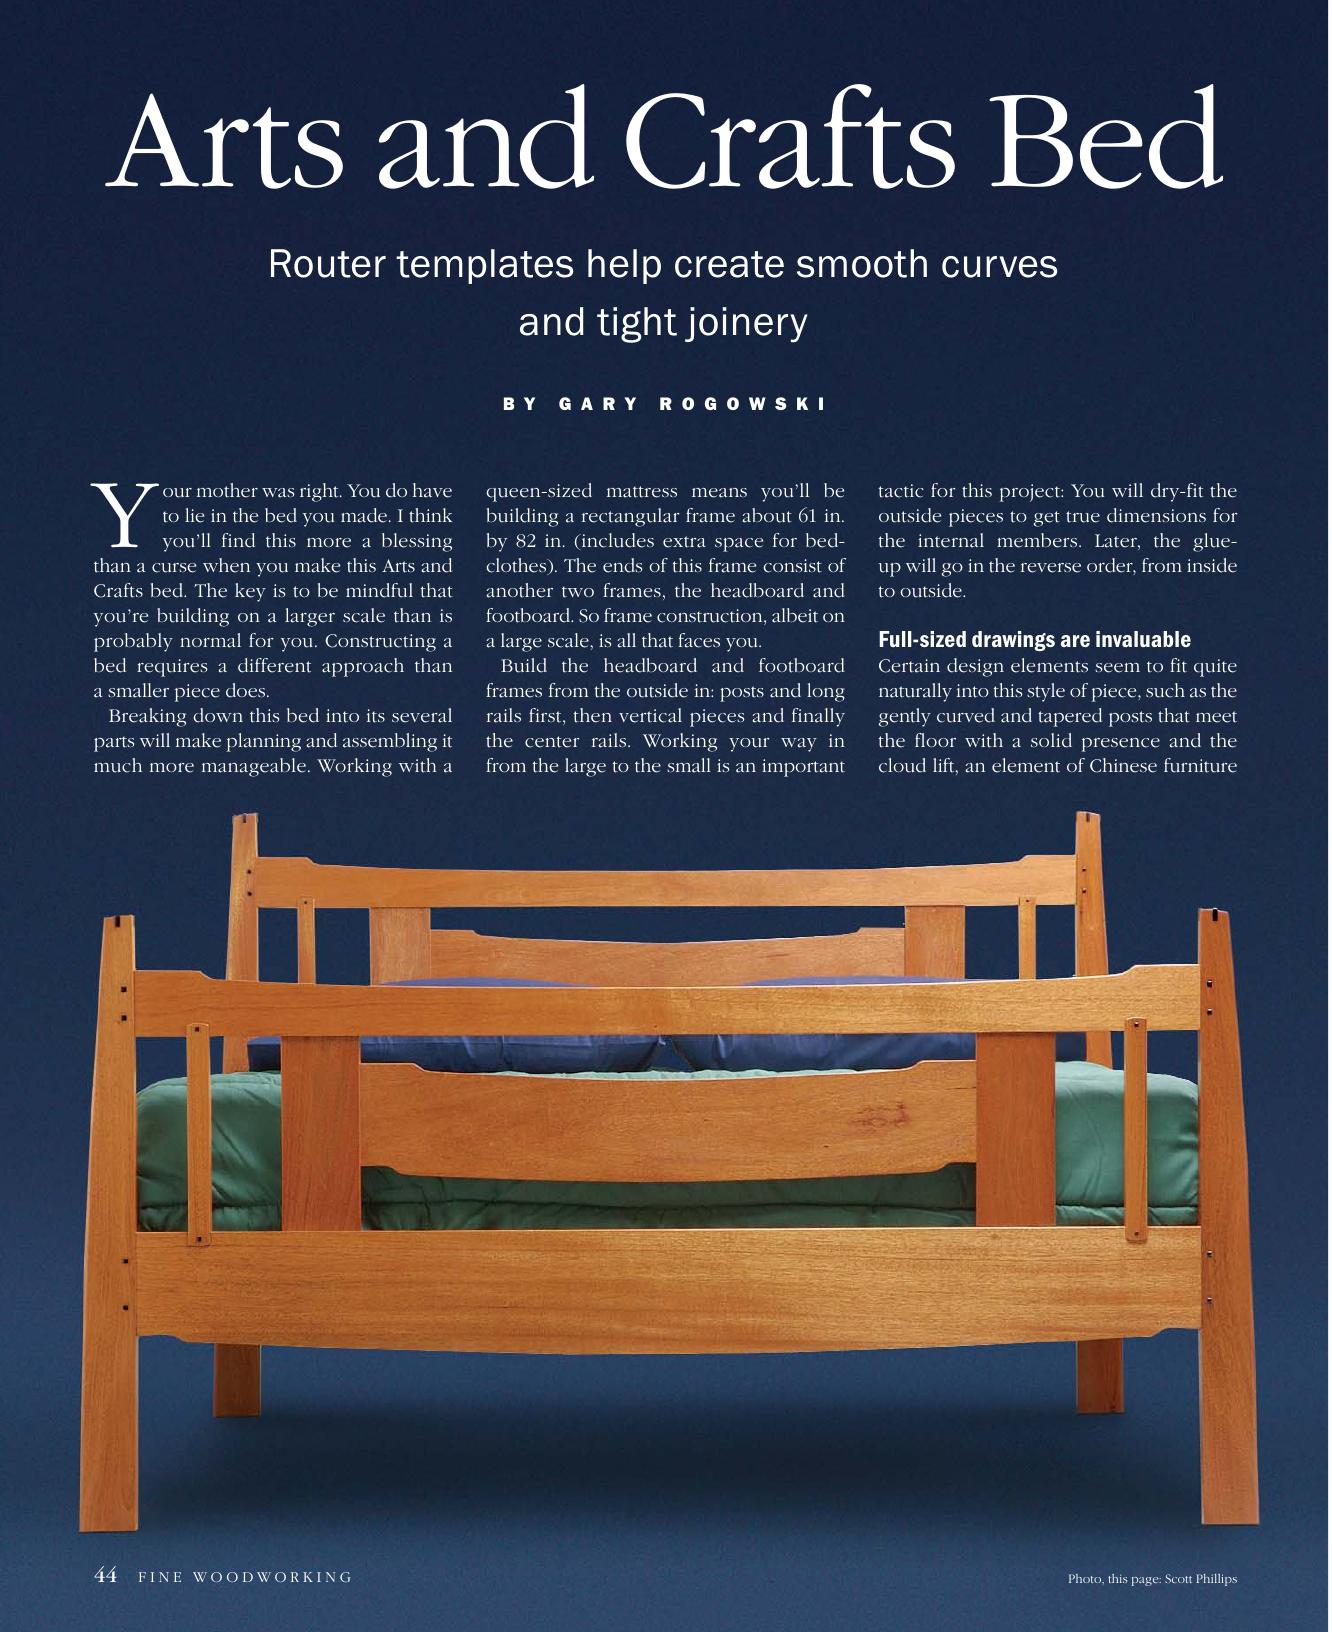 Arts and Crafts Bed by Gary Rogowski